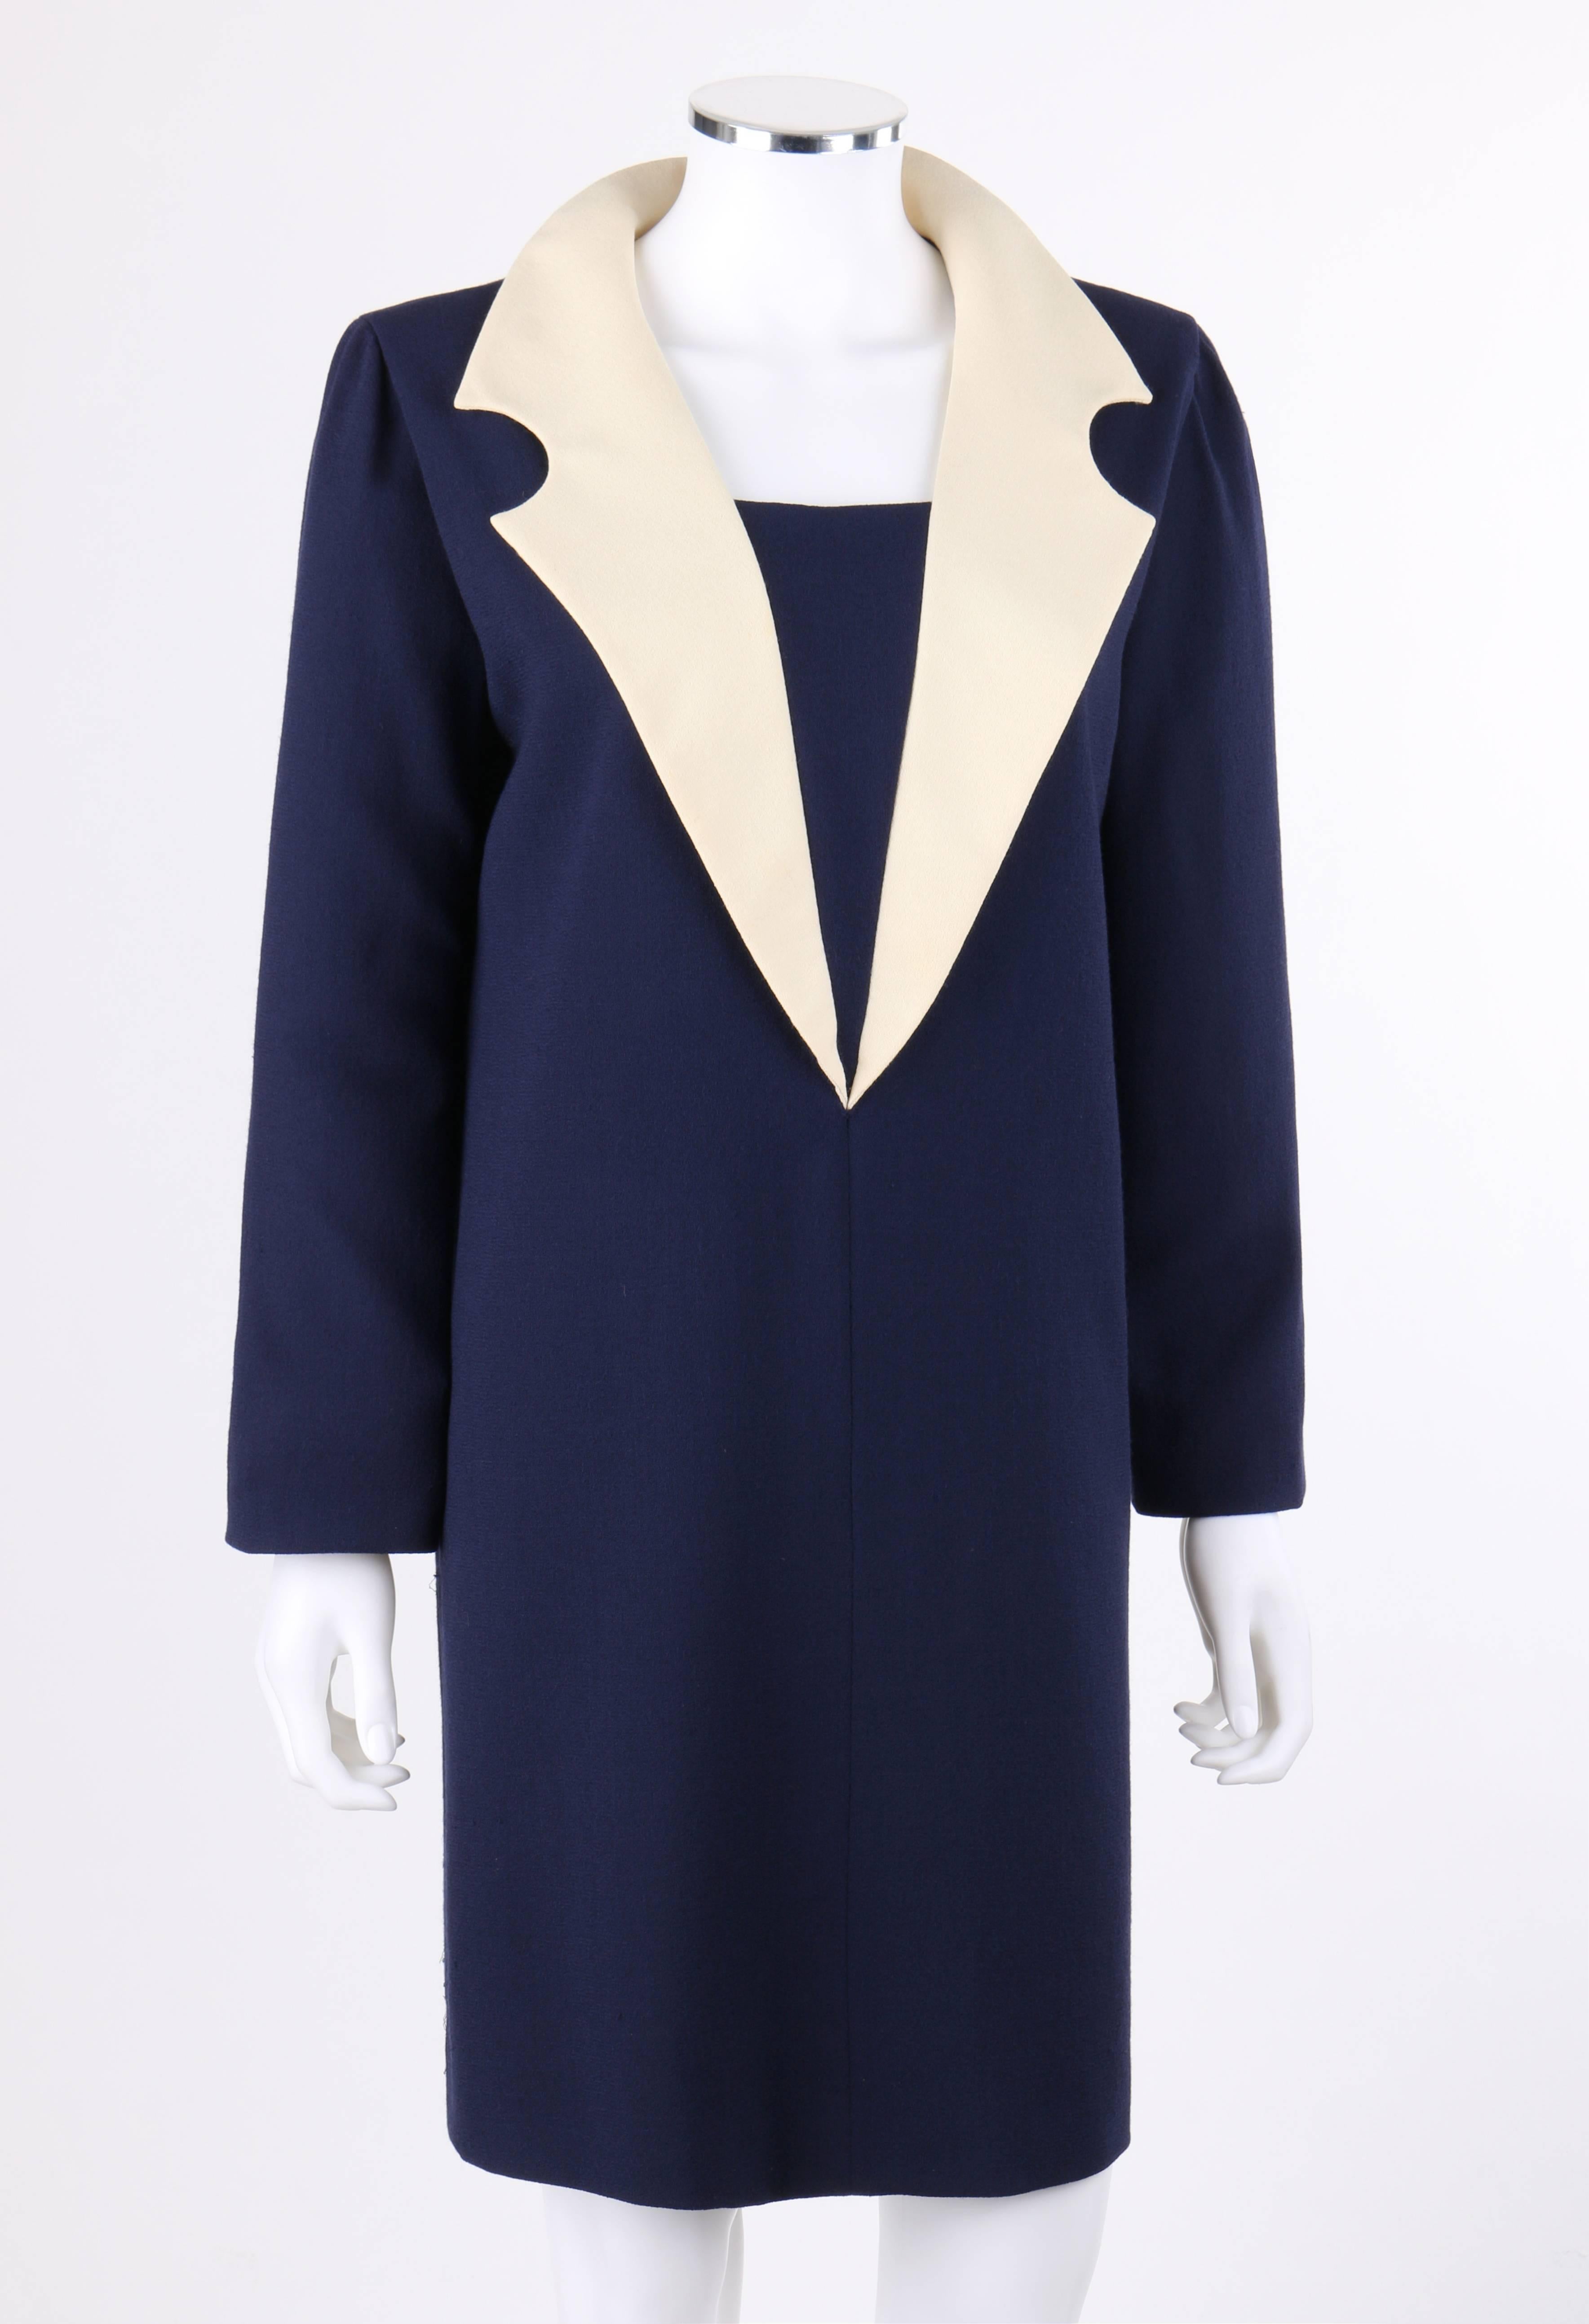 Pierre Cardin c.1992 navy blue and ivory wool statement collar shift dress. Large ivory circular notched lapel collar with center back single snap closure. Center front modesty panel. Long sleeves. Shift style. Center back invisible zipper closure.